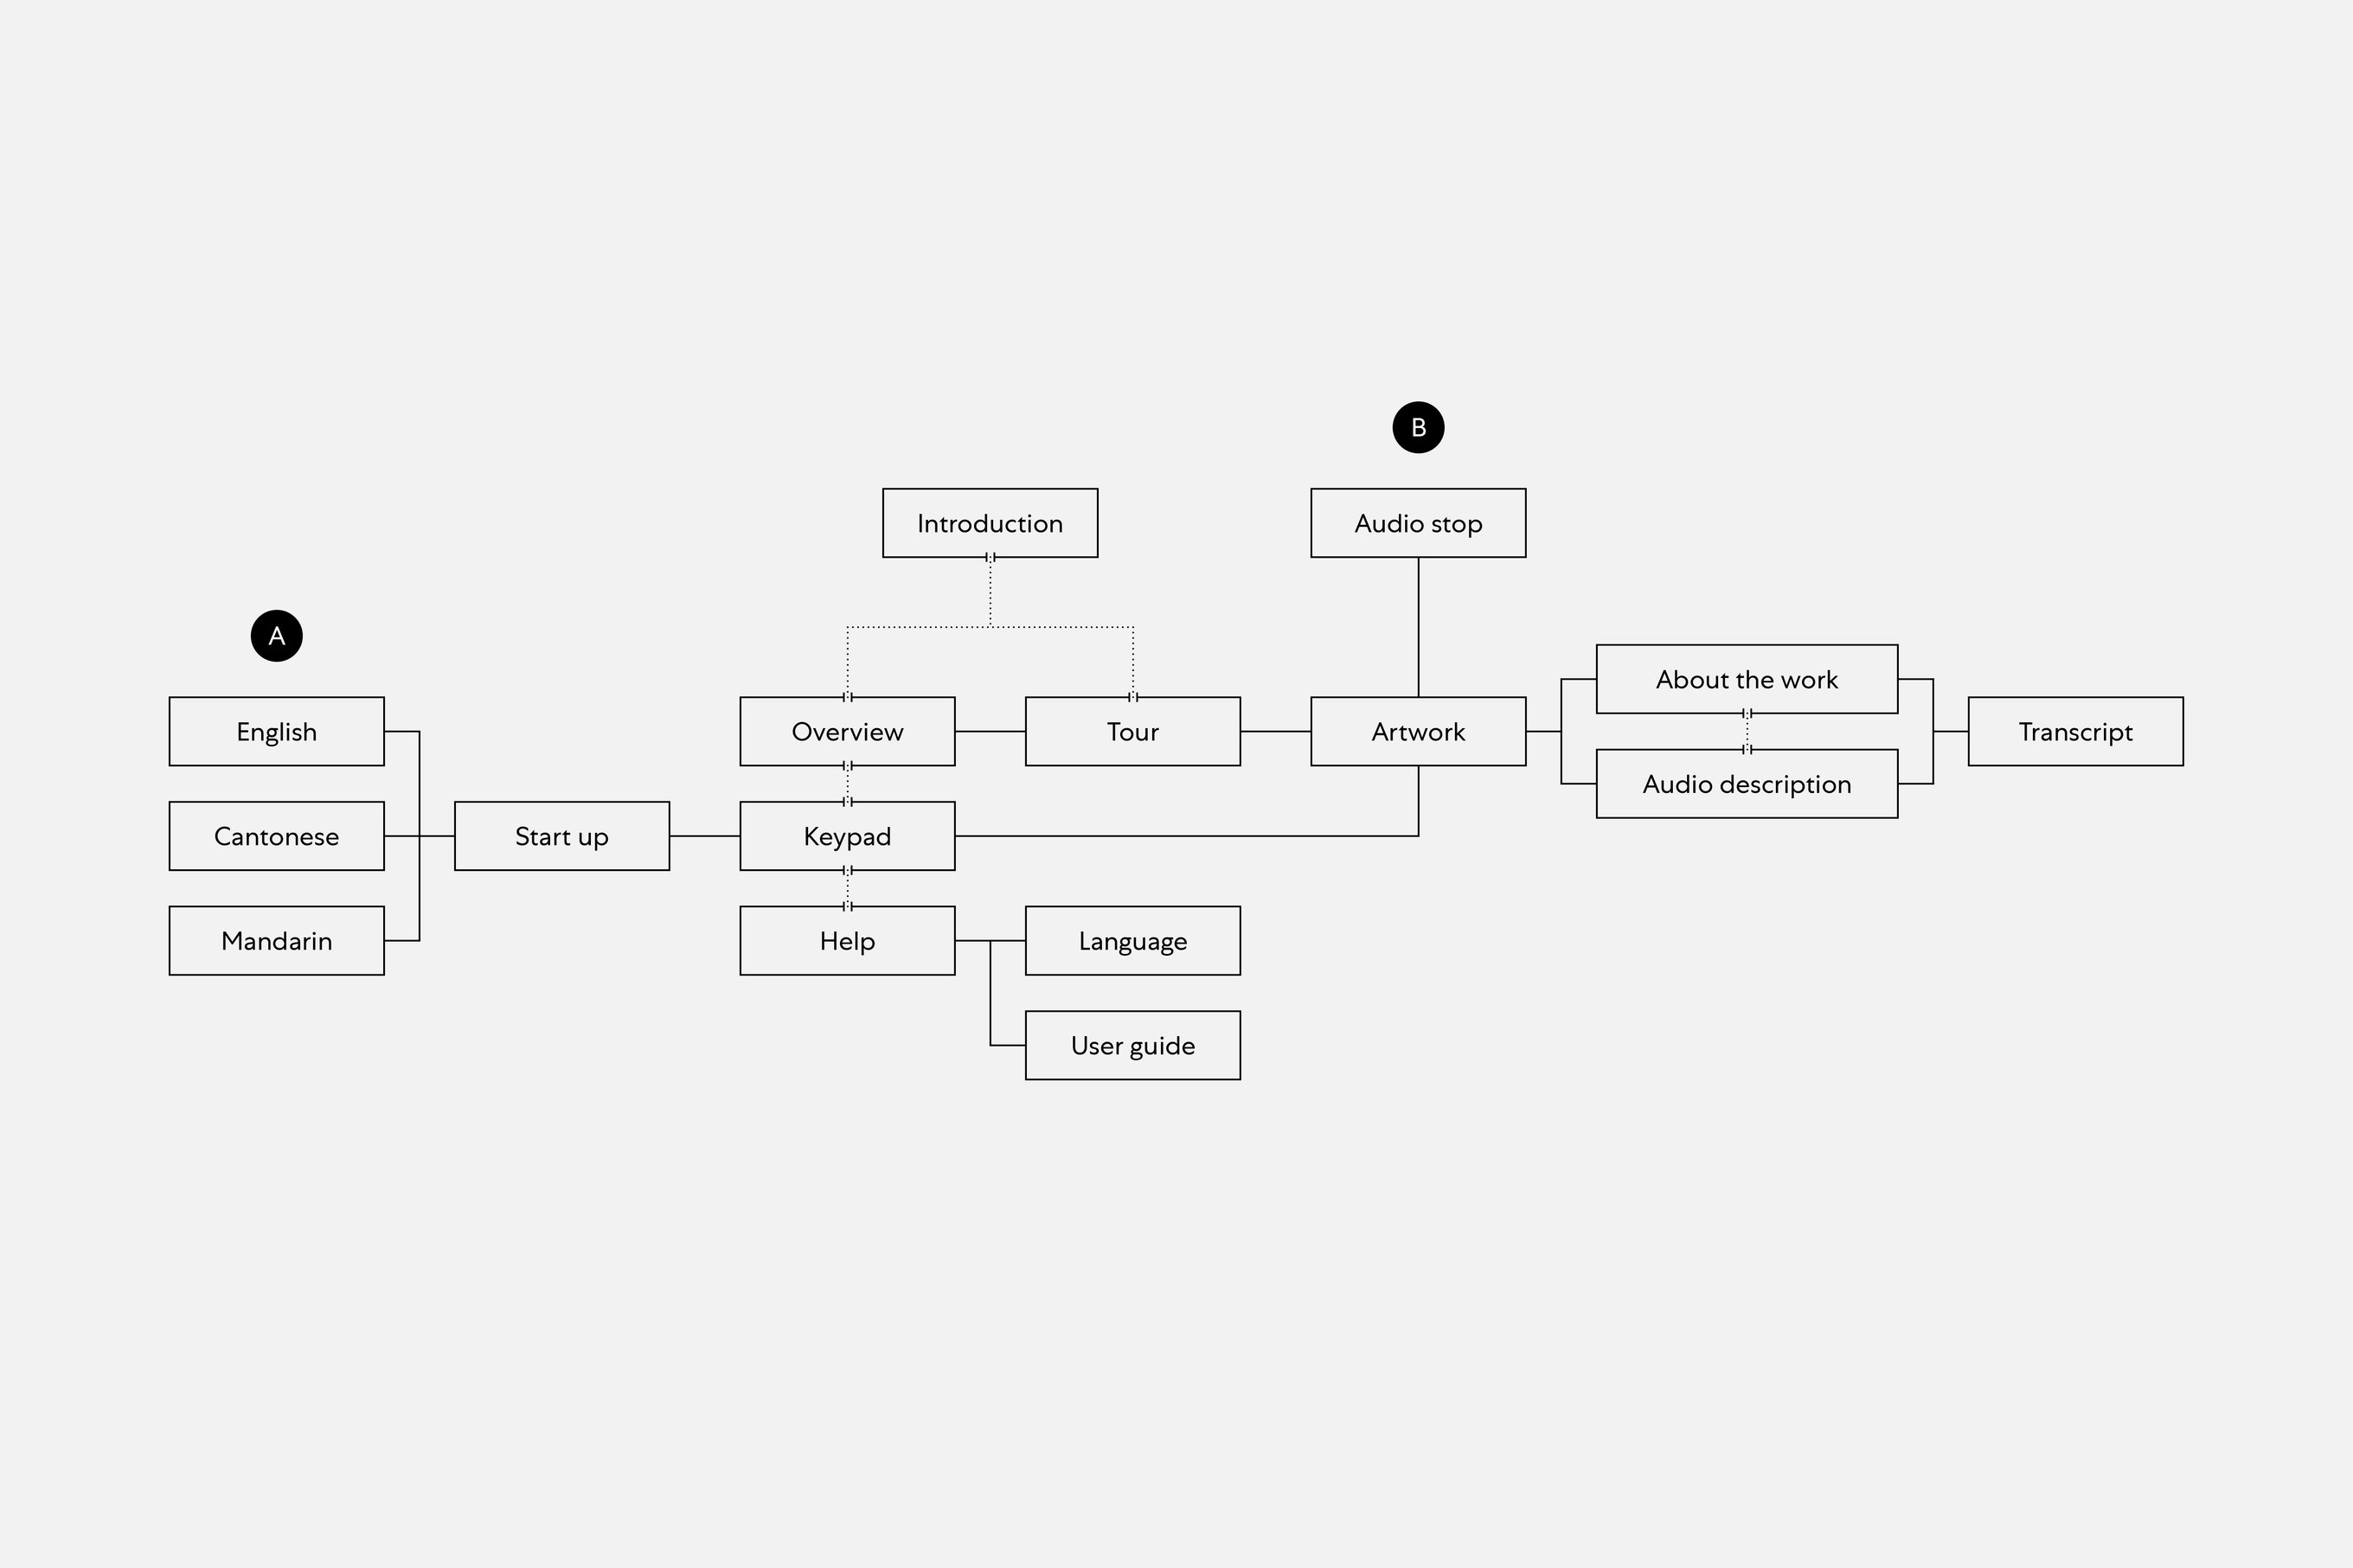 A flow chart of the audio guide featuring two user flows that intertwine with each other and form a complete journey.